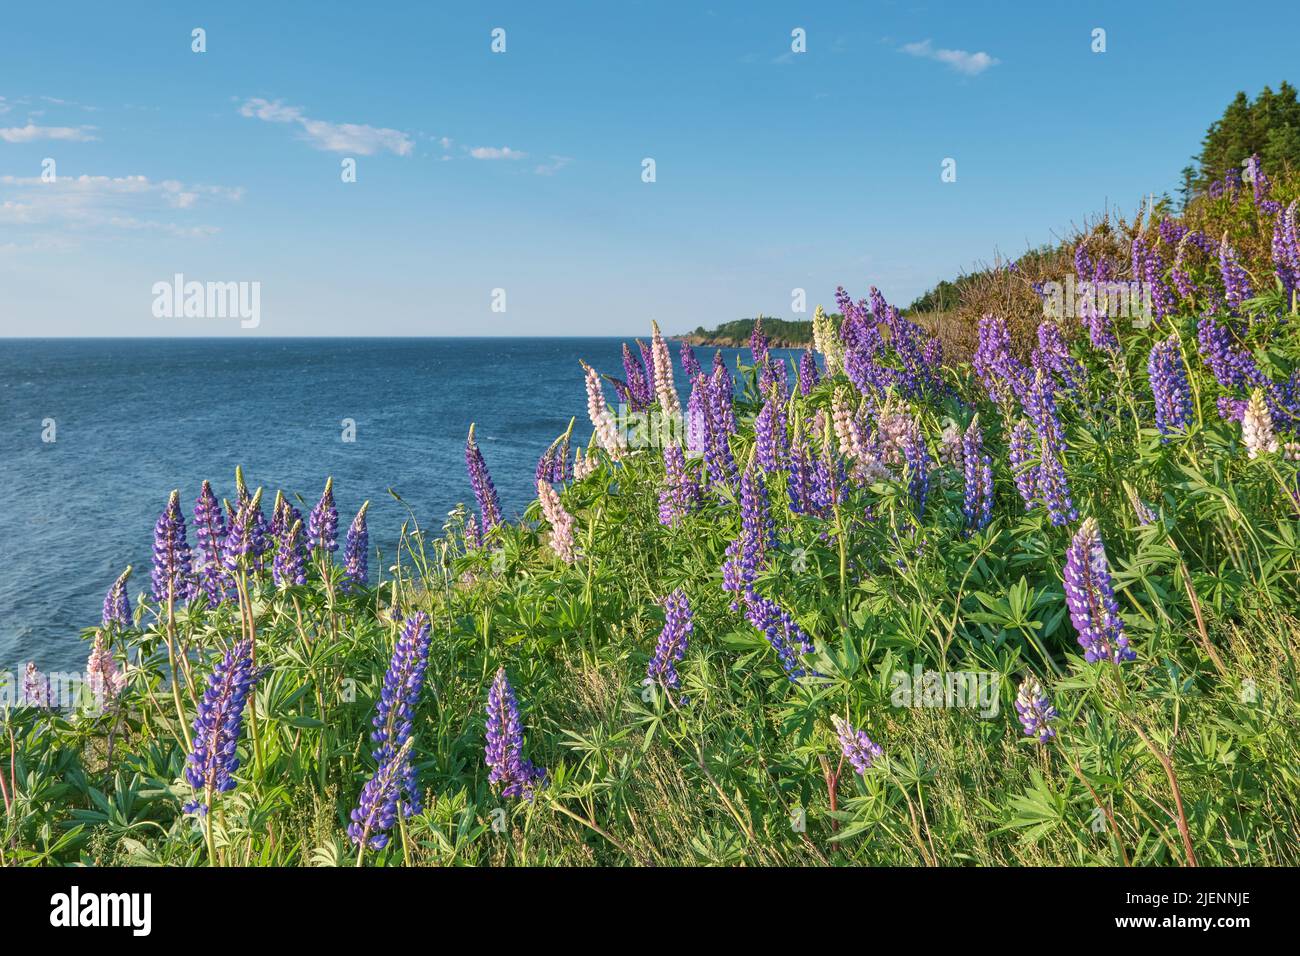 Wild lupins, Lupinus leguminosae, abound in late spring and summer in nova scotia.  These were photographed near the shore of South Bar Nova Scotia. Stock Photo